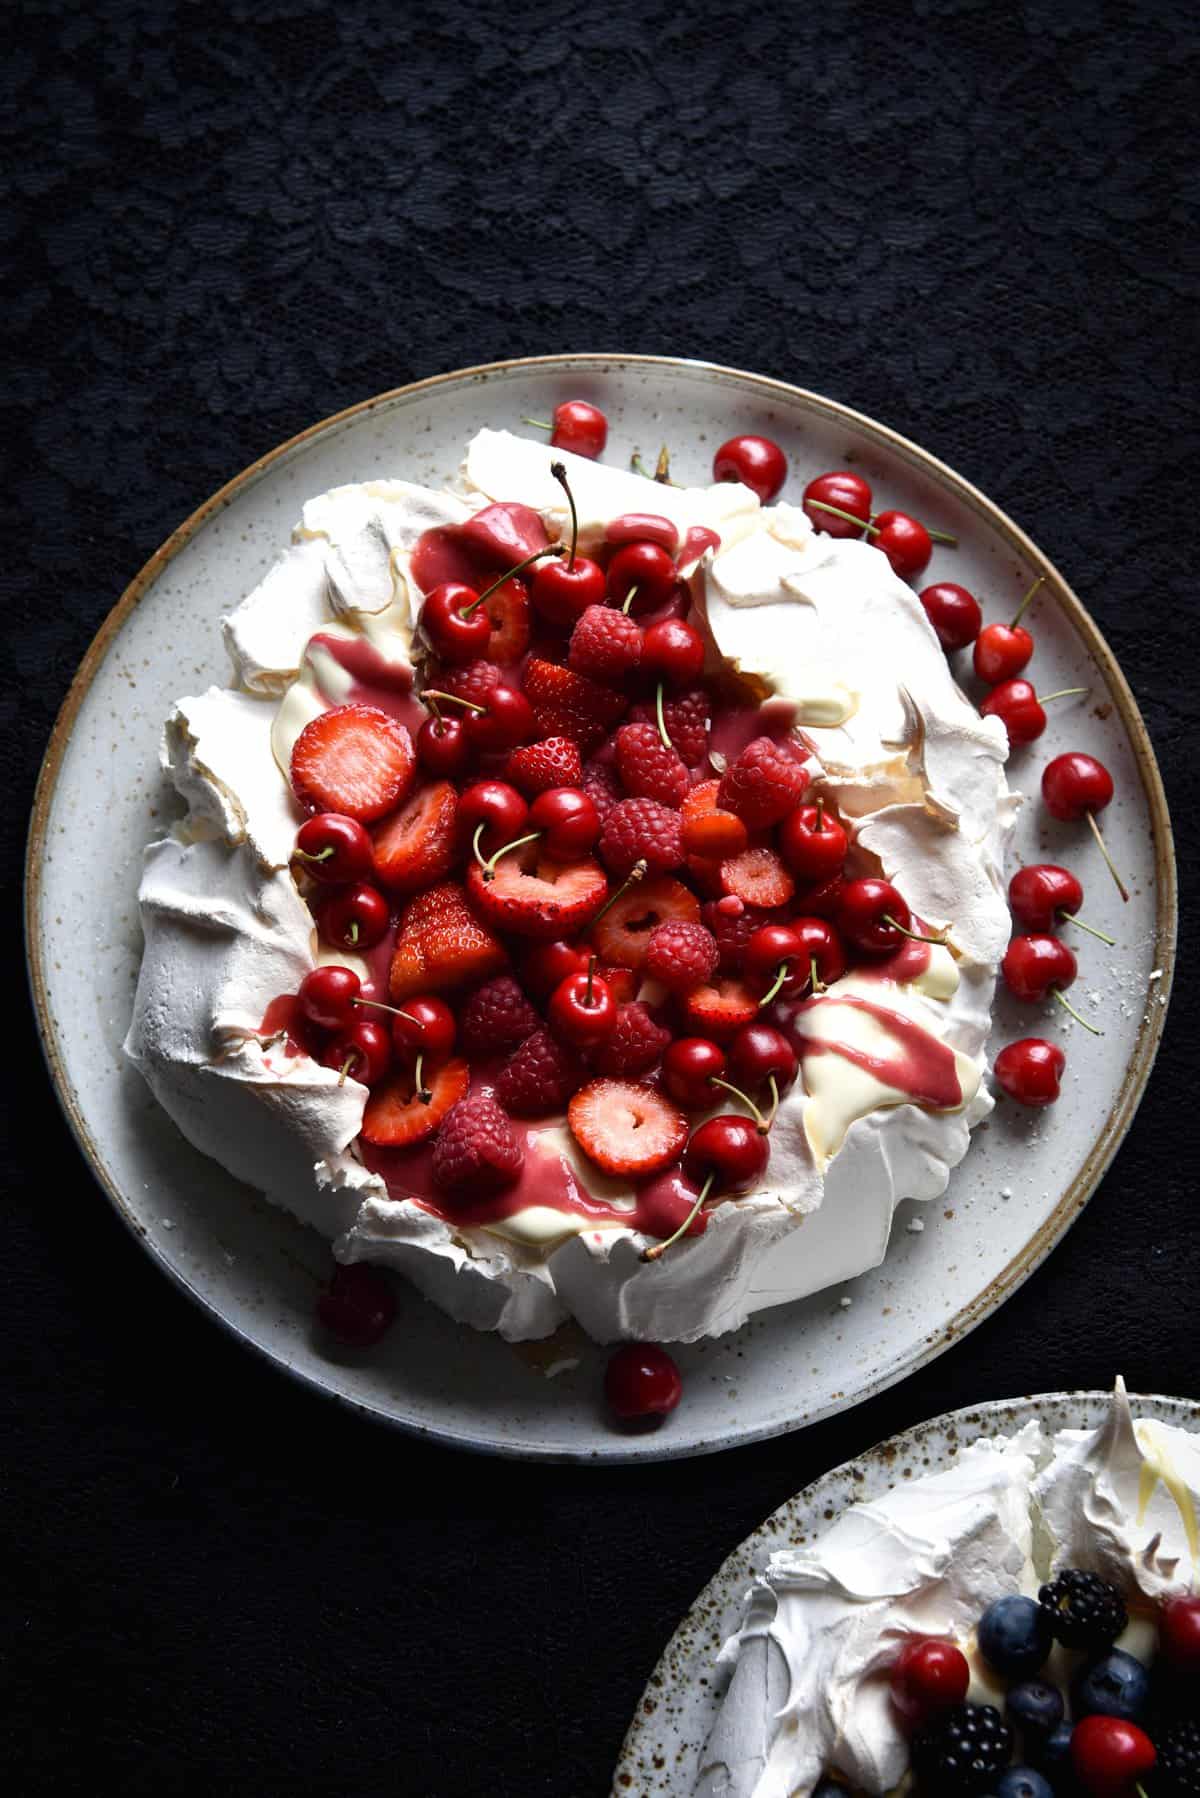 Pavlova covered in lactose free raspberry curd and lots of red berries against a black backdrop